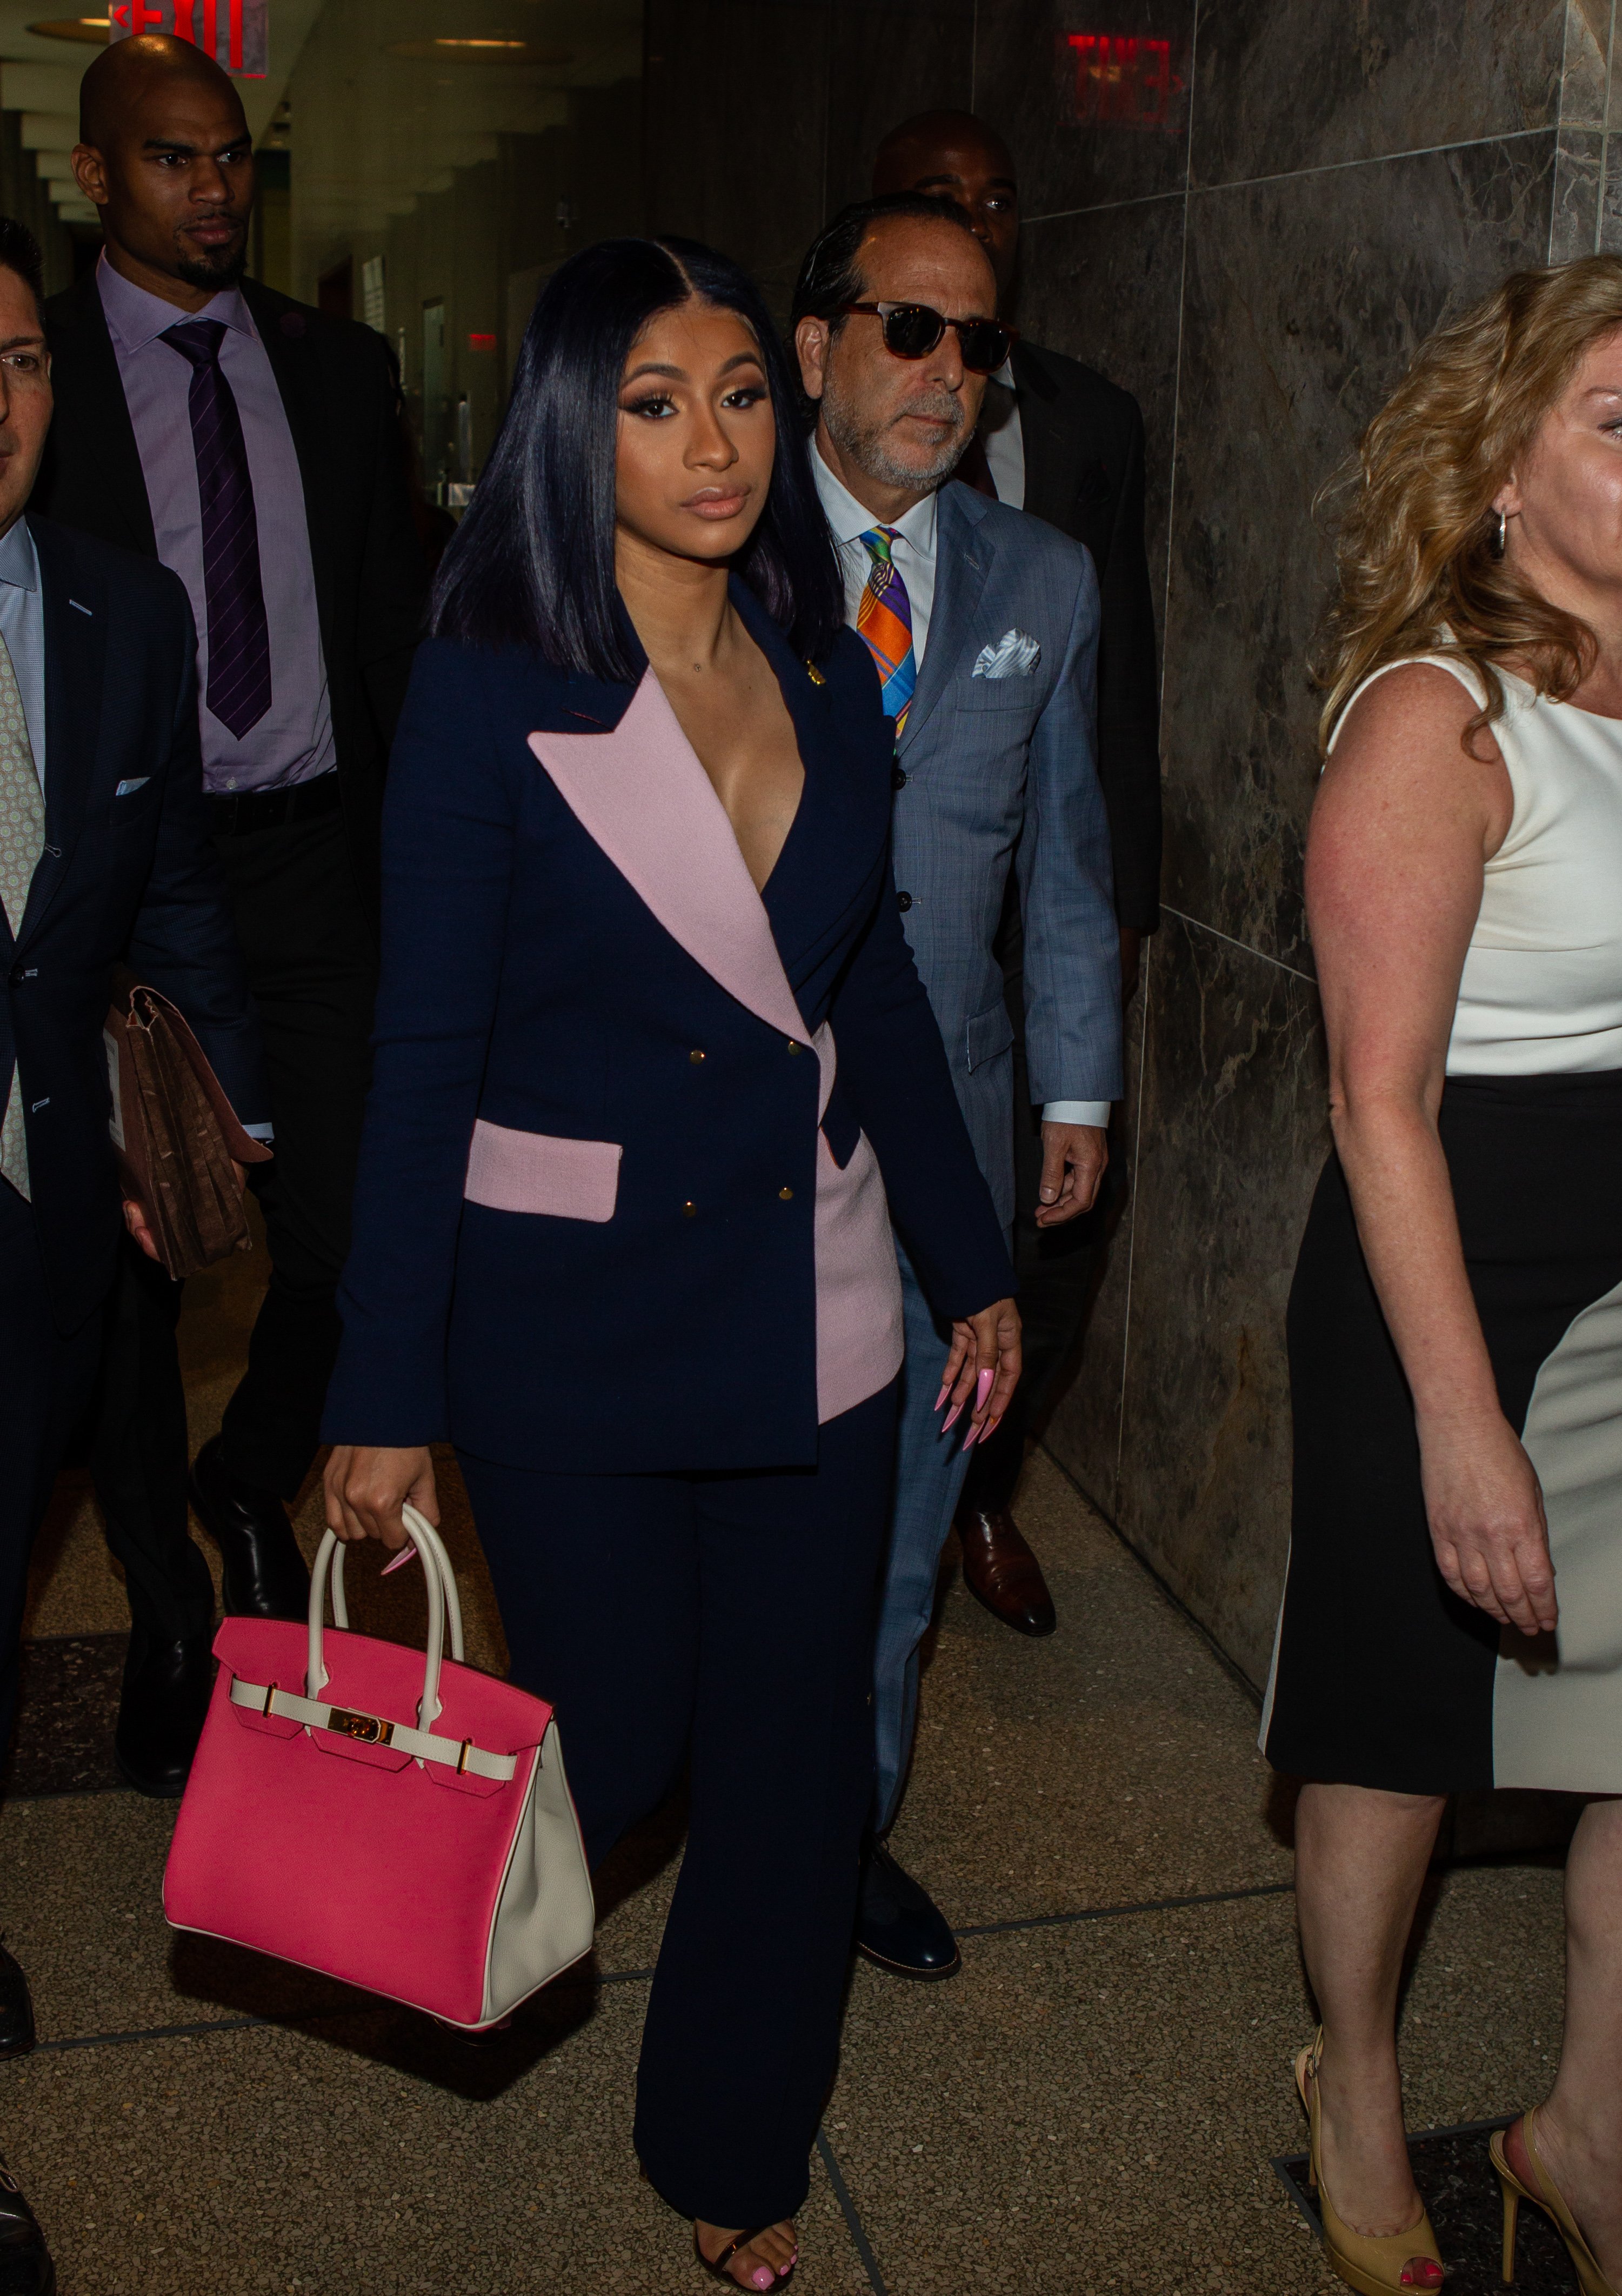 Cardi B leaves Queens County Supreme Court on June 25, 2019 in New York City | Photo: Getty Images